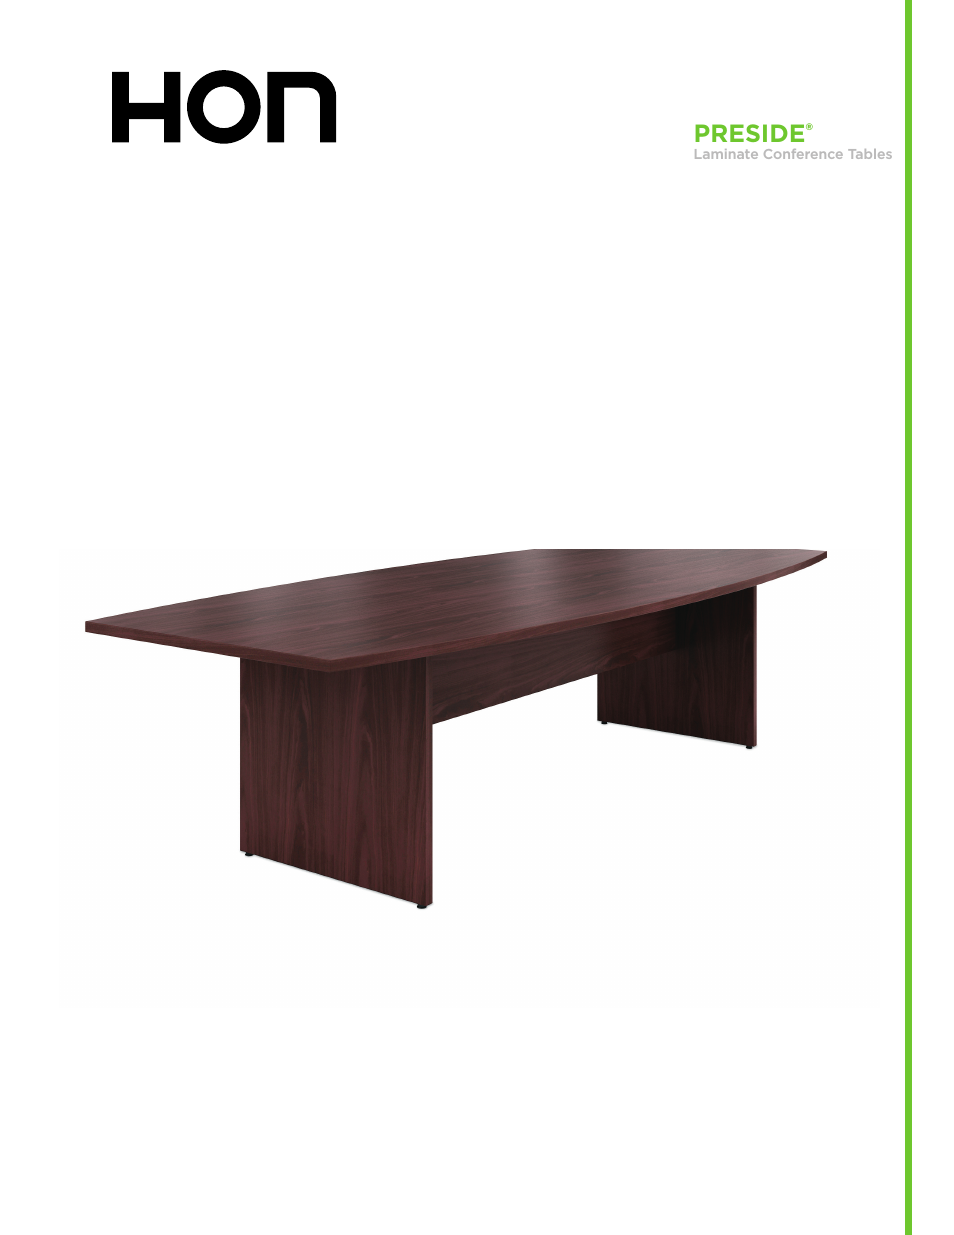 Preside Laminate Conference Tables